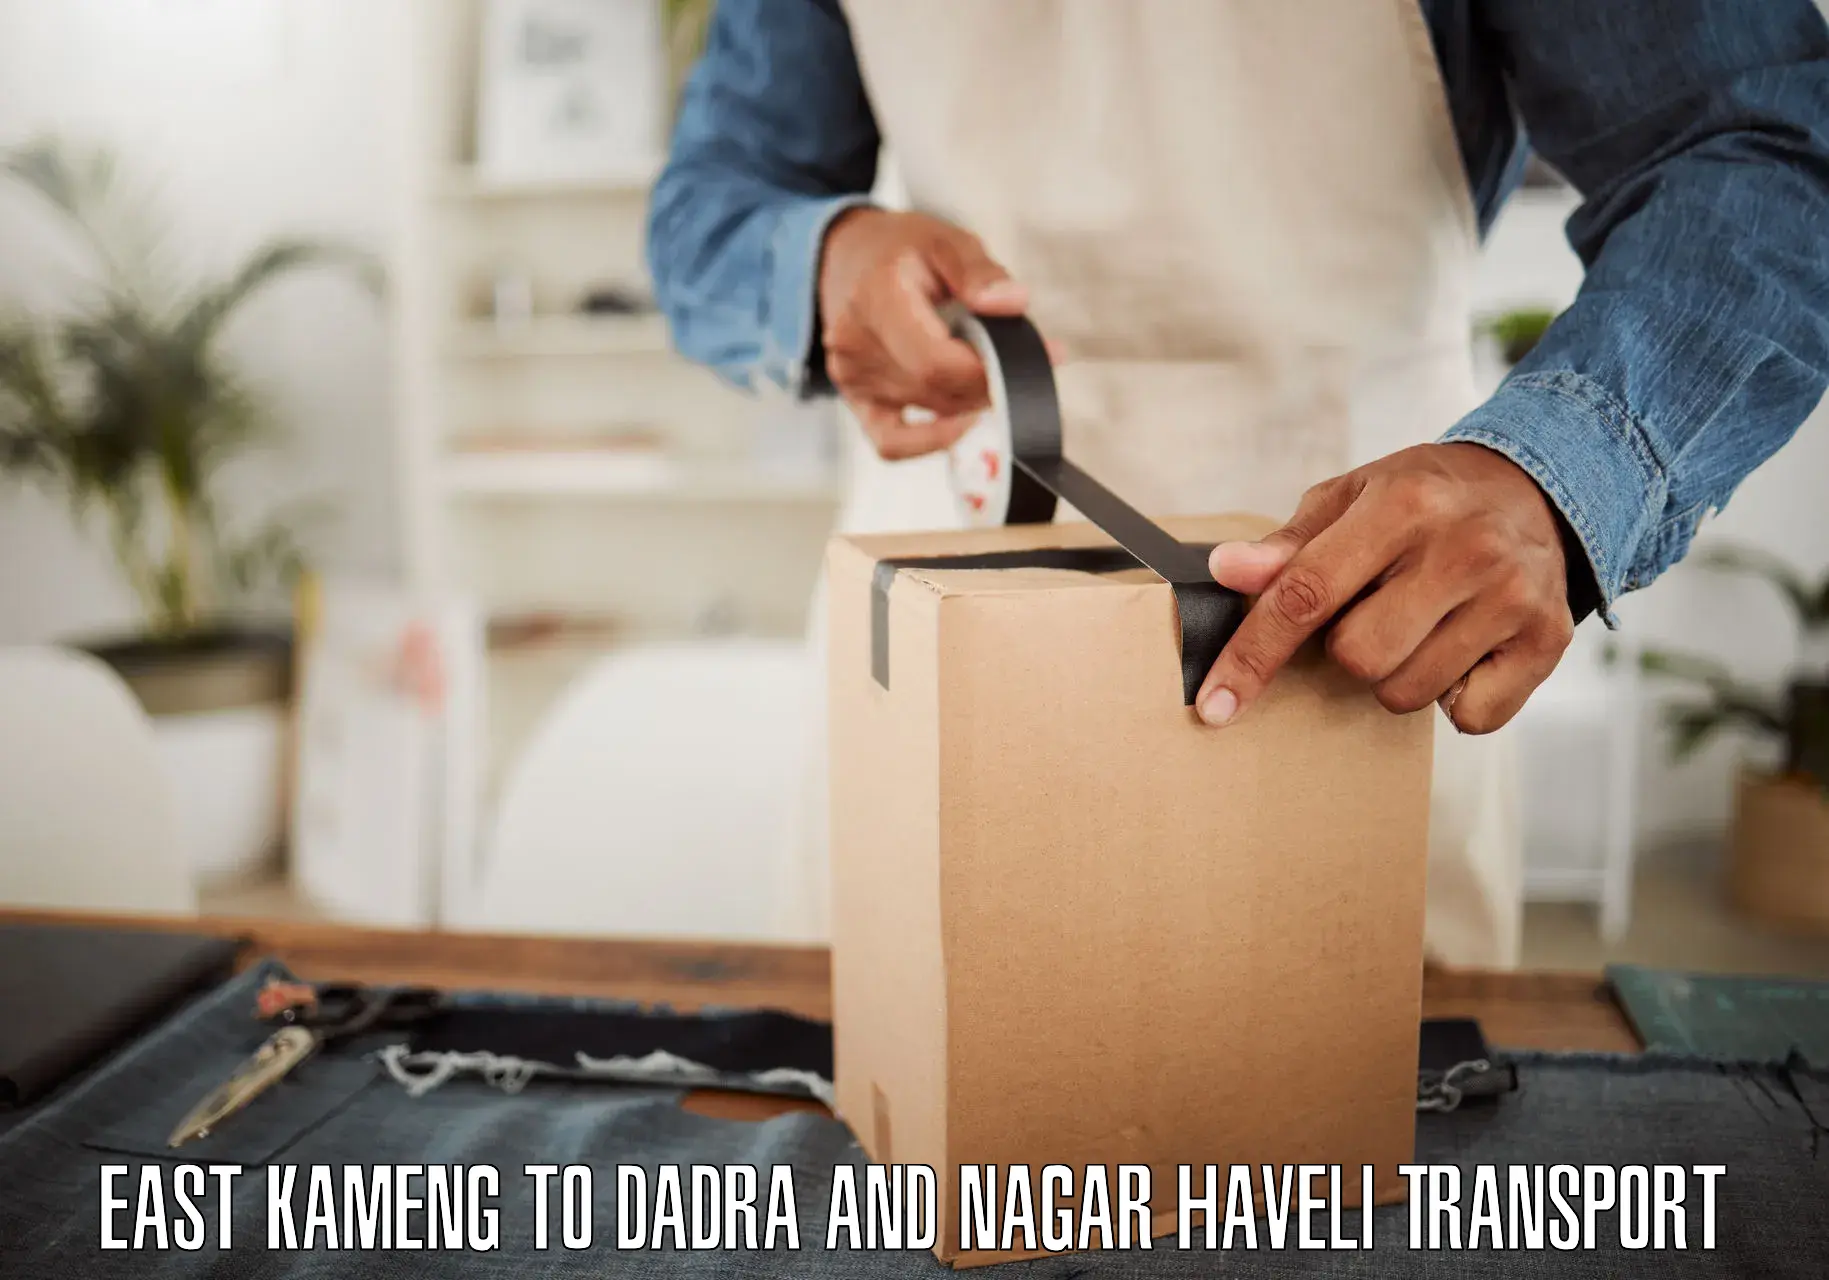 Container transport service East Kameng to Dadra and Nagar Haveli